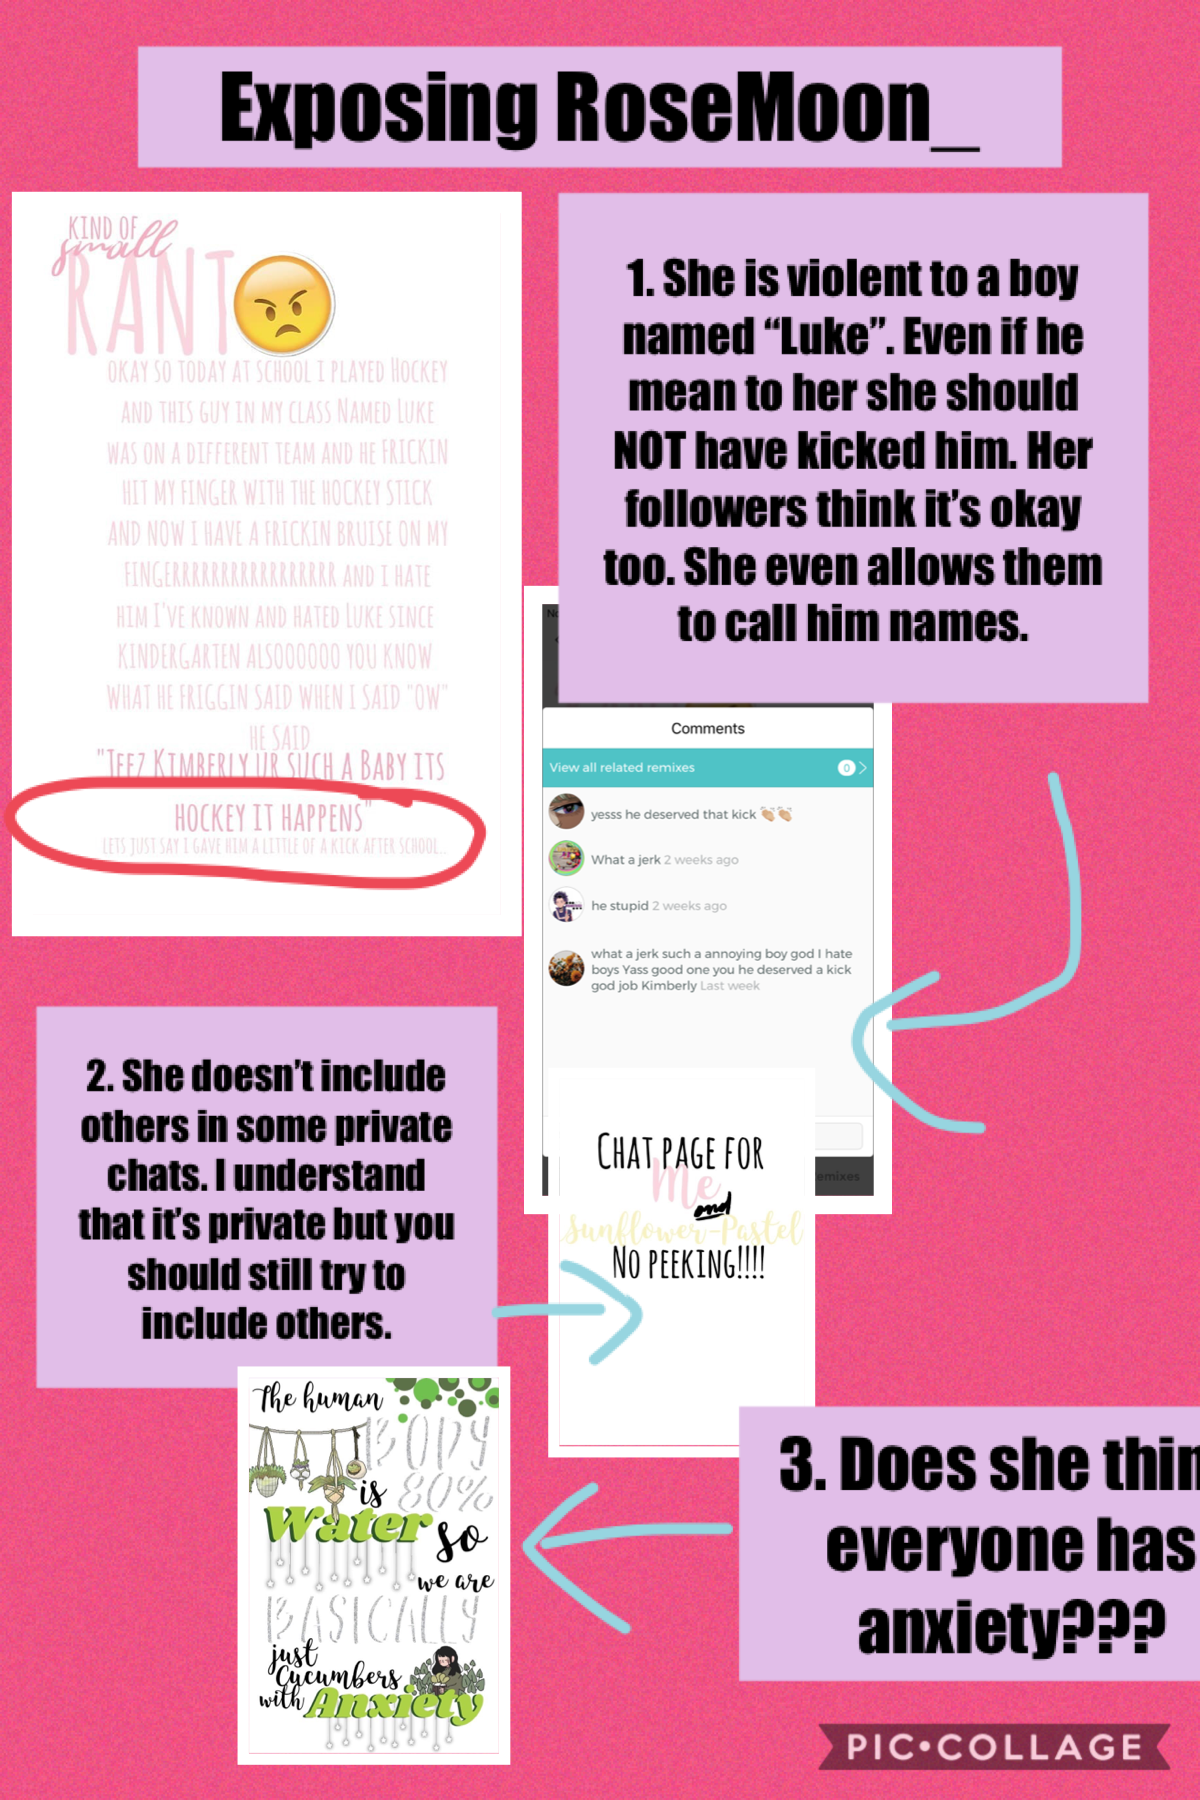 This was requested more info 👇🏼

RoseMoon_  seems very nice and you should go follow her. I made this because it was requested by her. I do NOT dislike her or anything! 